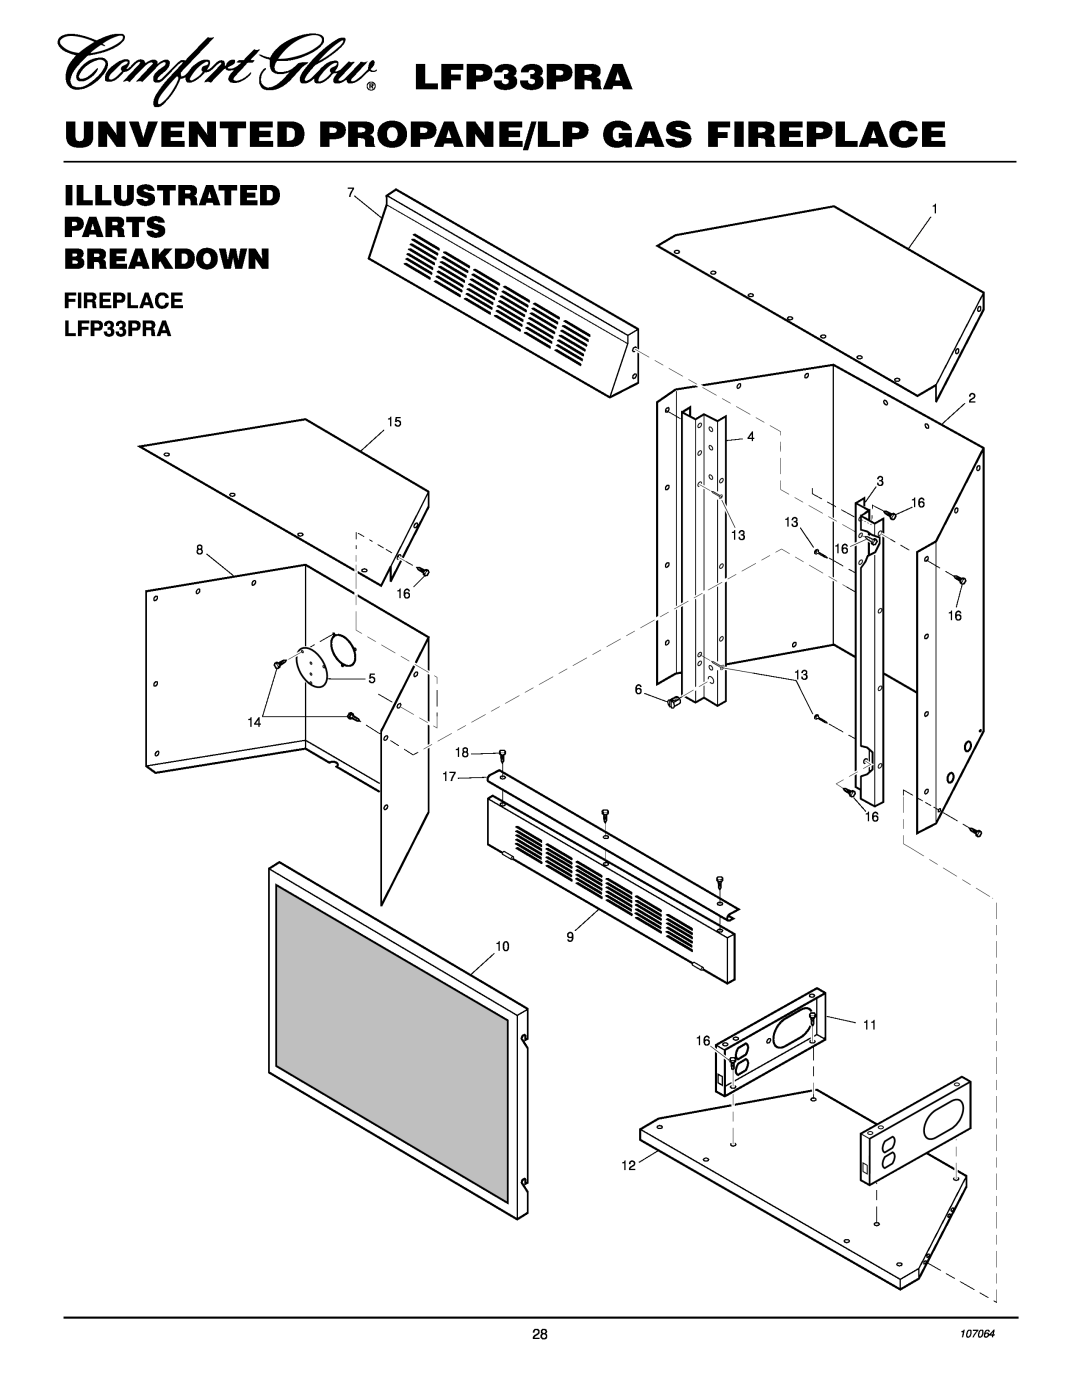 Desa installation manual Fireplace, LFP33PRA UNVENTED PROPANE/LP GAS FIREPLACE, Illustrated, Parts, Breakdown, 107064 